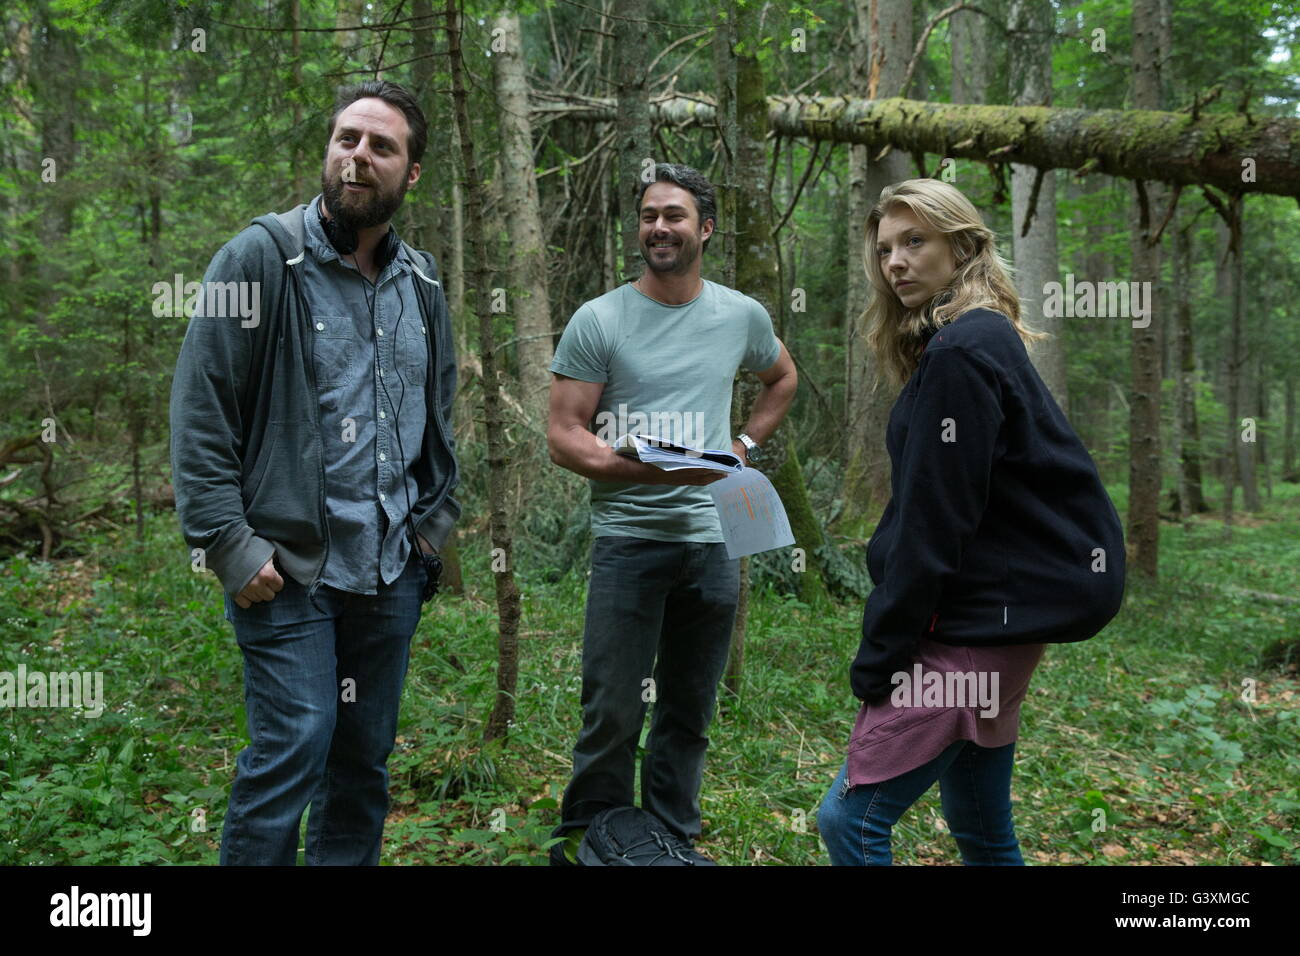 RELEASE DATE: January 8, 2106 TITLE: The Forest STUDIO: Gramercy Pictures DIRECTOR: Jason Zada PLOT: A woman goes into Japan's Suicide Forest to find her twin sister, and confronts supernatural terror STARRING: Natalie Dormer, Taylor Kinney, Jason Zada on set (Credit: c Gramercy Pictures/Entertainment Pictures/) Stock Photo